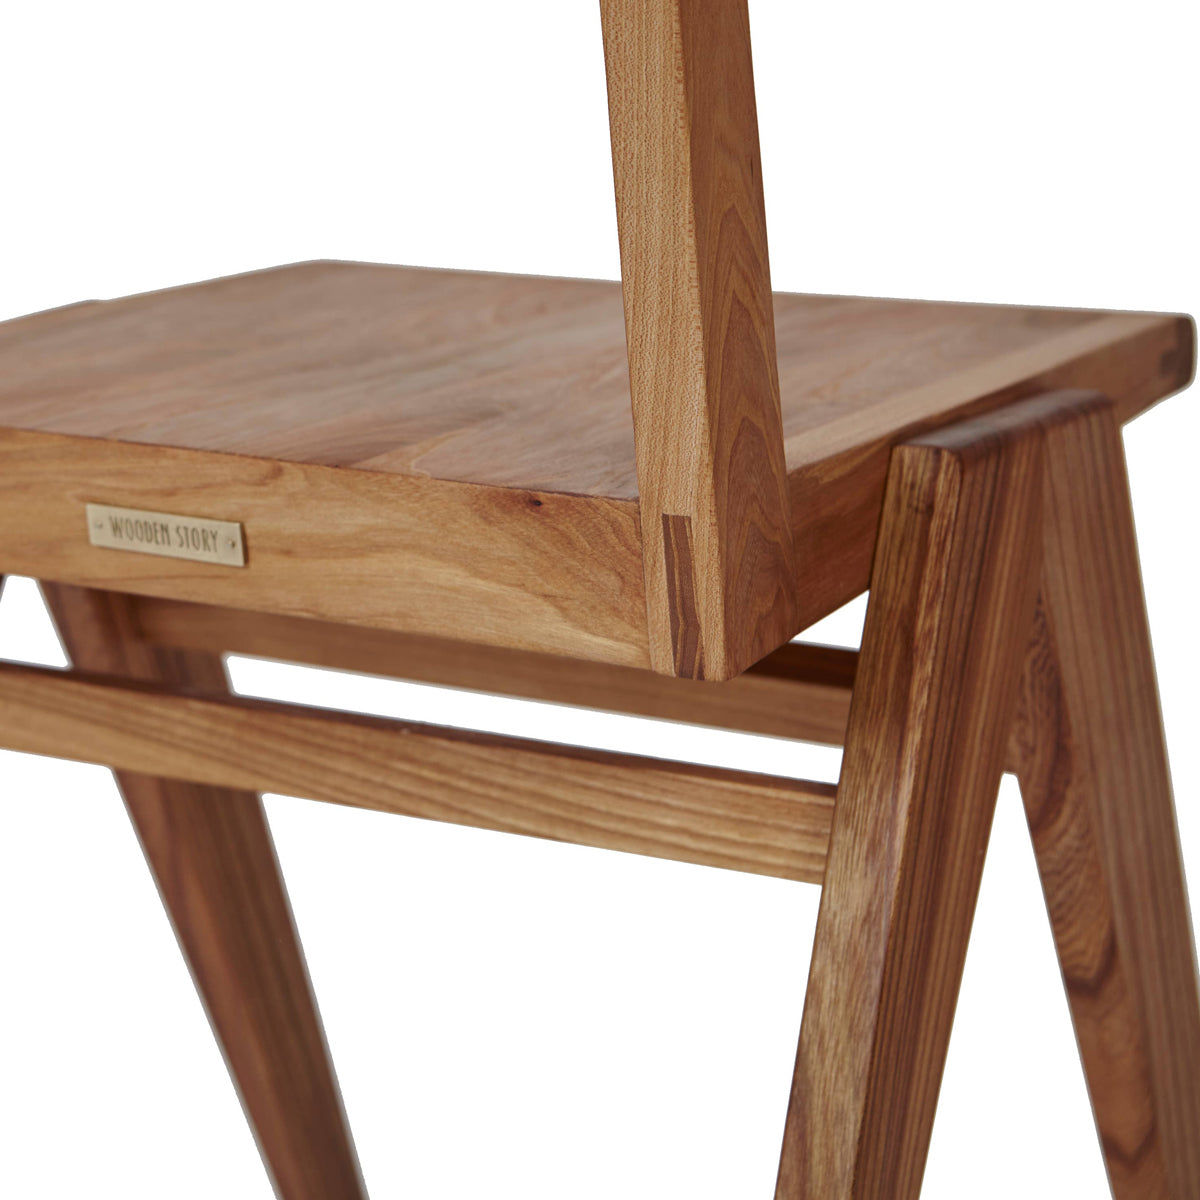 Chair No. 01